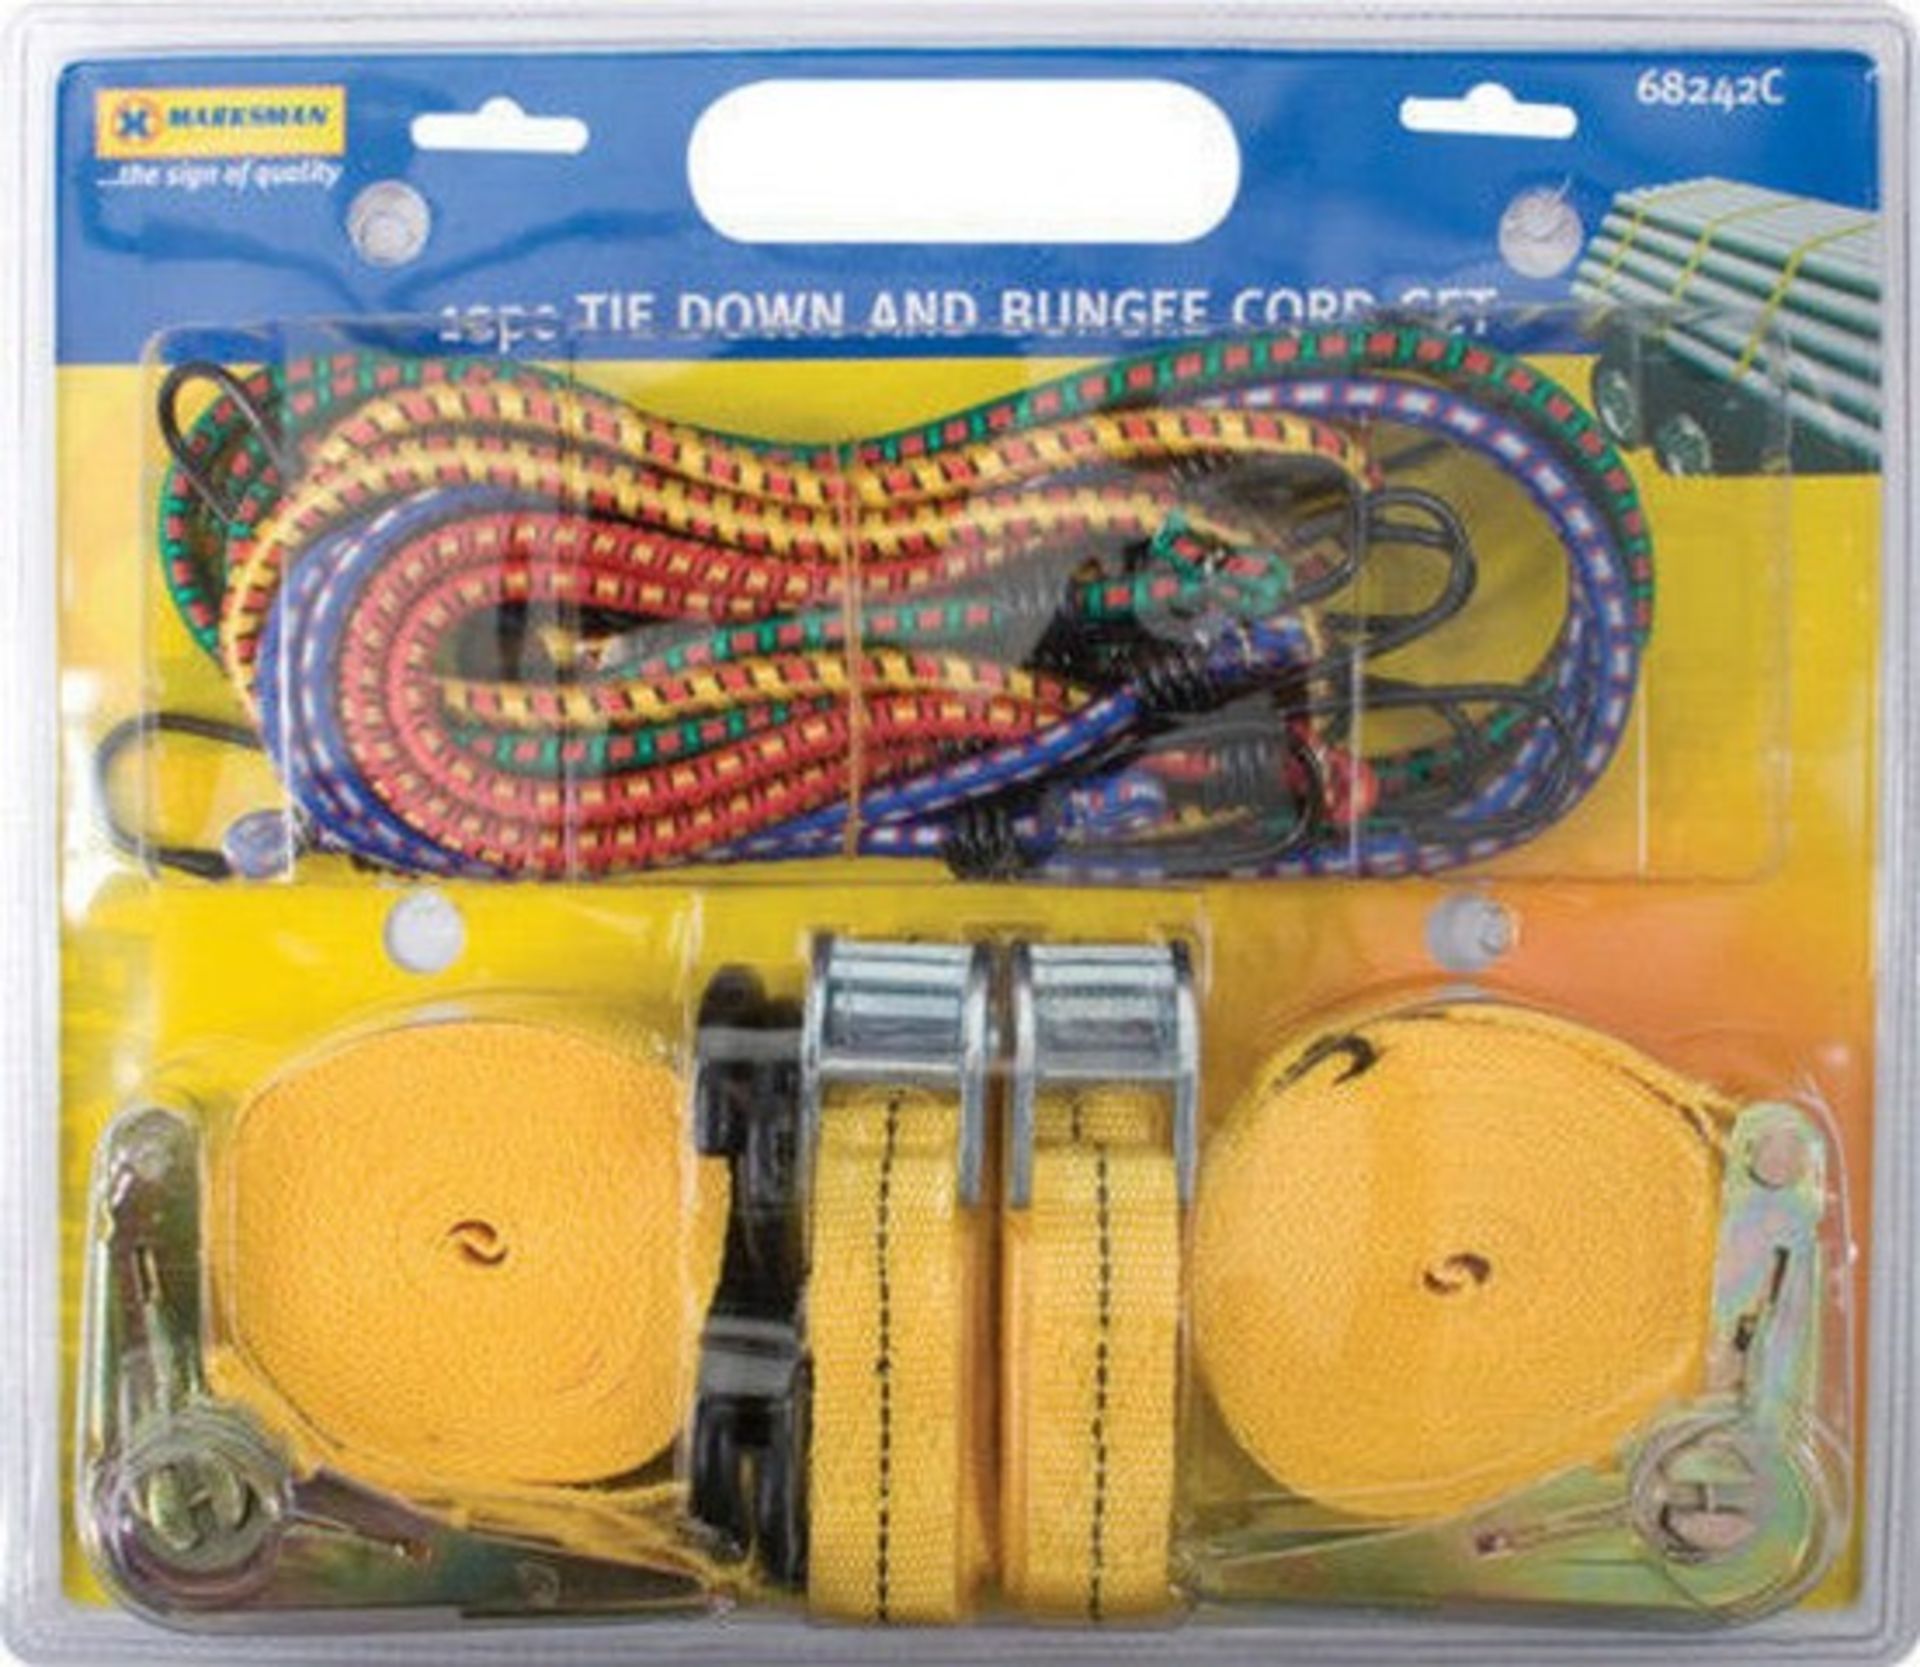 V Brand New 12 Piece Tie Down & Bungee Cord Set - Image 2 of 2